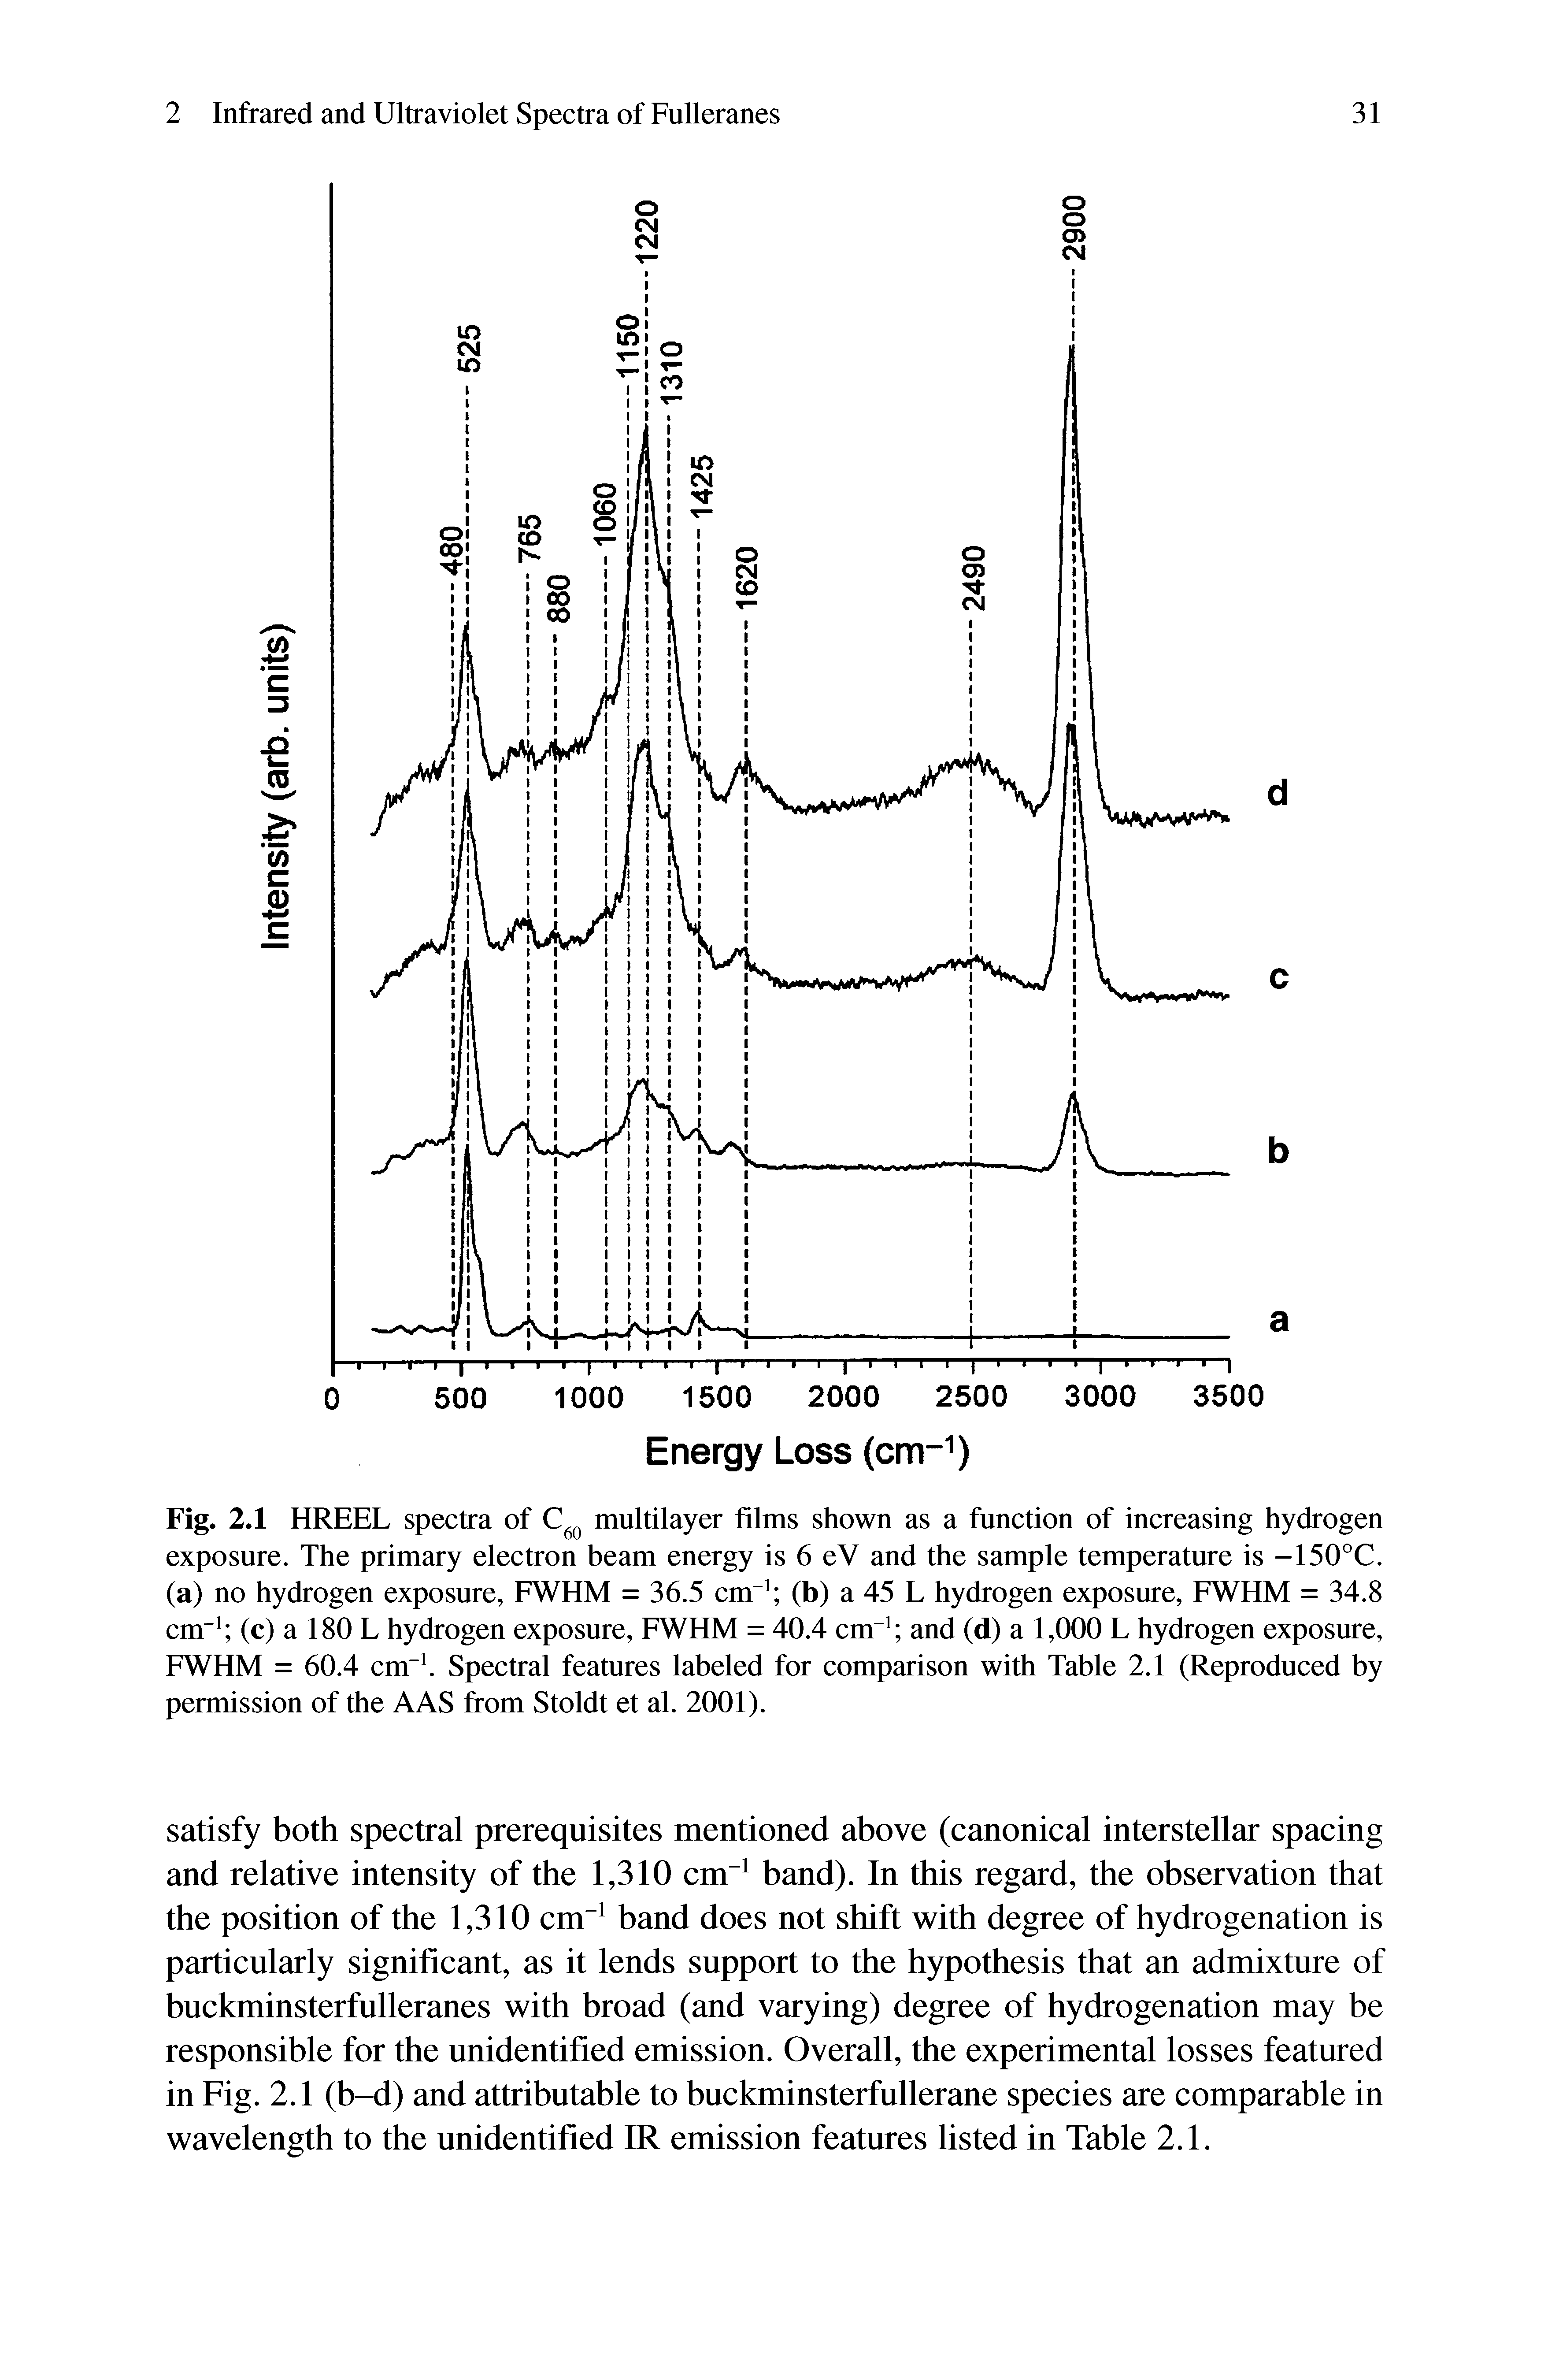 Fig. 2.1 HREEL spectra of C60 multilayer films shown as a function of increasing hydrogen exposure. The primary electron beam energy is 6 eV and the sample temperature is -150°C. (a) no hydrogen exposure, FWHM = 36.5 cm-1 (b) a 45 L hydrogen exposure, FWHM = 34.8 cm-1 (c) a 180 L hydrogen exposure, FWHM = 40.4 cm-1 and (d) a 1,000 L hydrogen exposure, FWHM = 60.4 cm-1. Spectral features labeled for comparison with Table 2.1 (Reproduced by permission of the AAS from Stoldt et al. 2001).